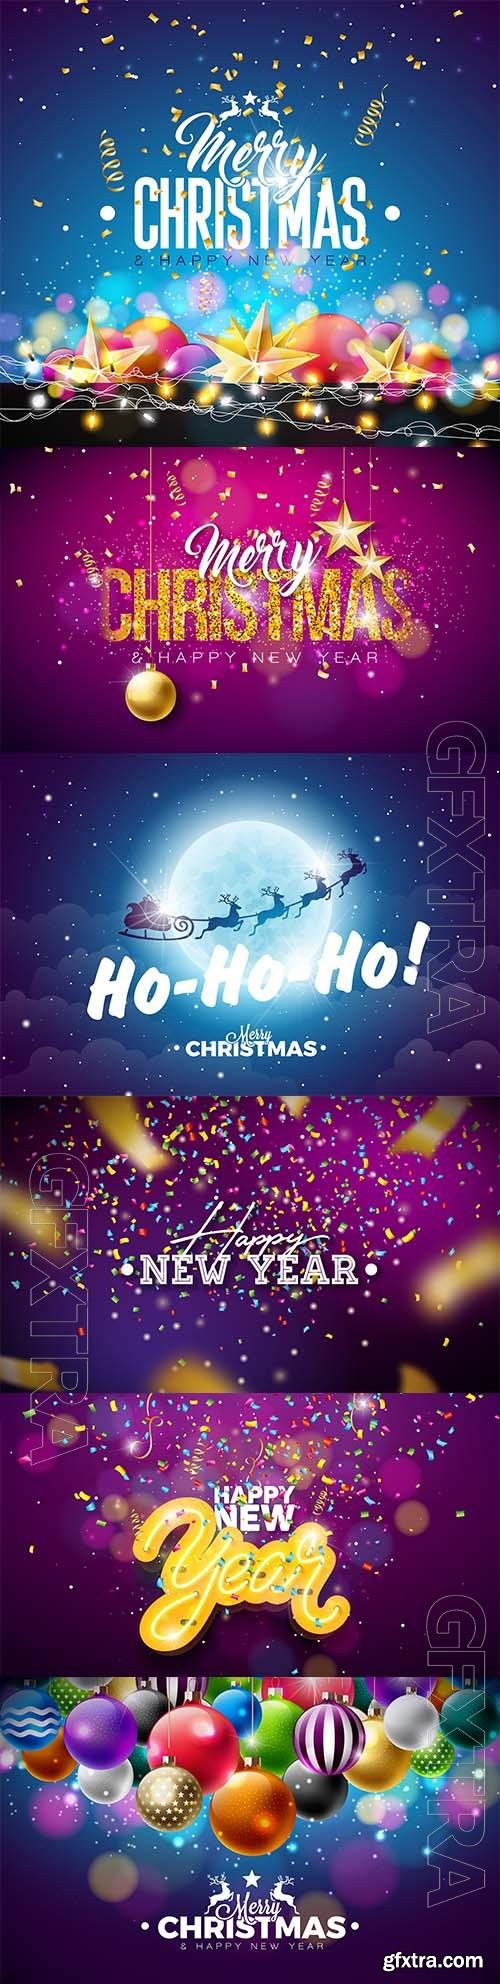 Merry christmas and happy new year illustration with colorful glass ball and intertwined tube